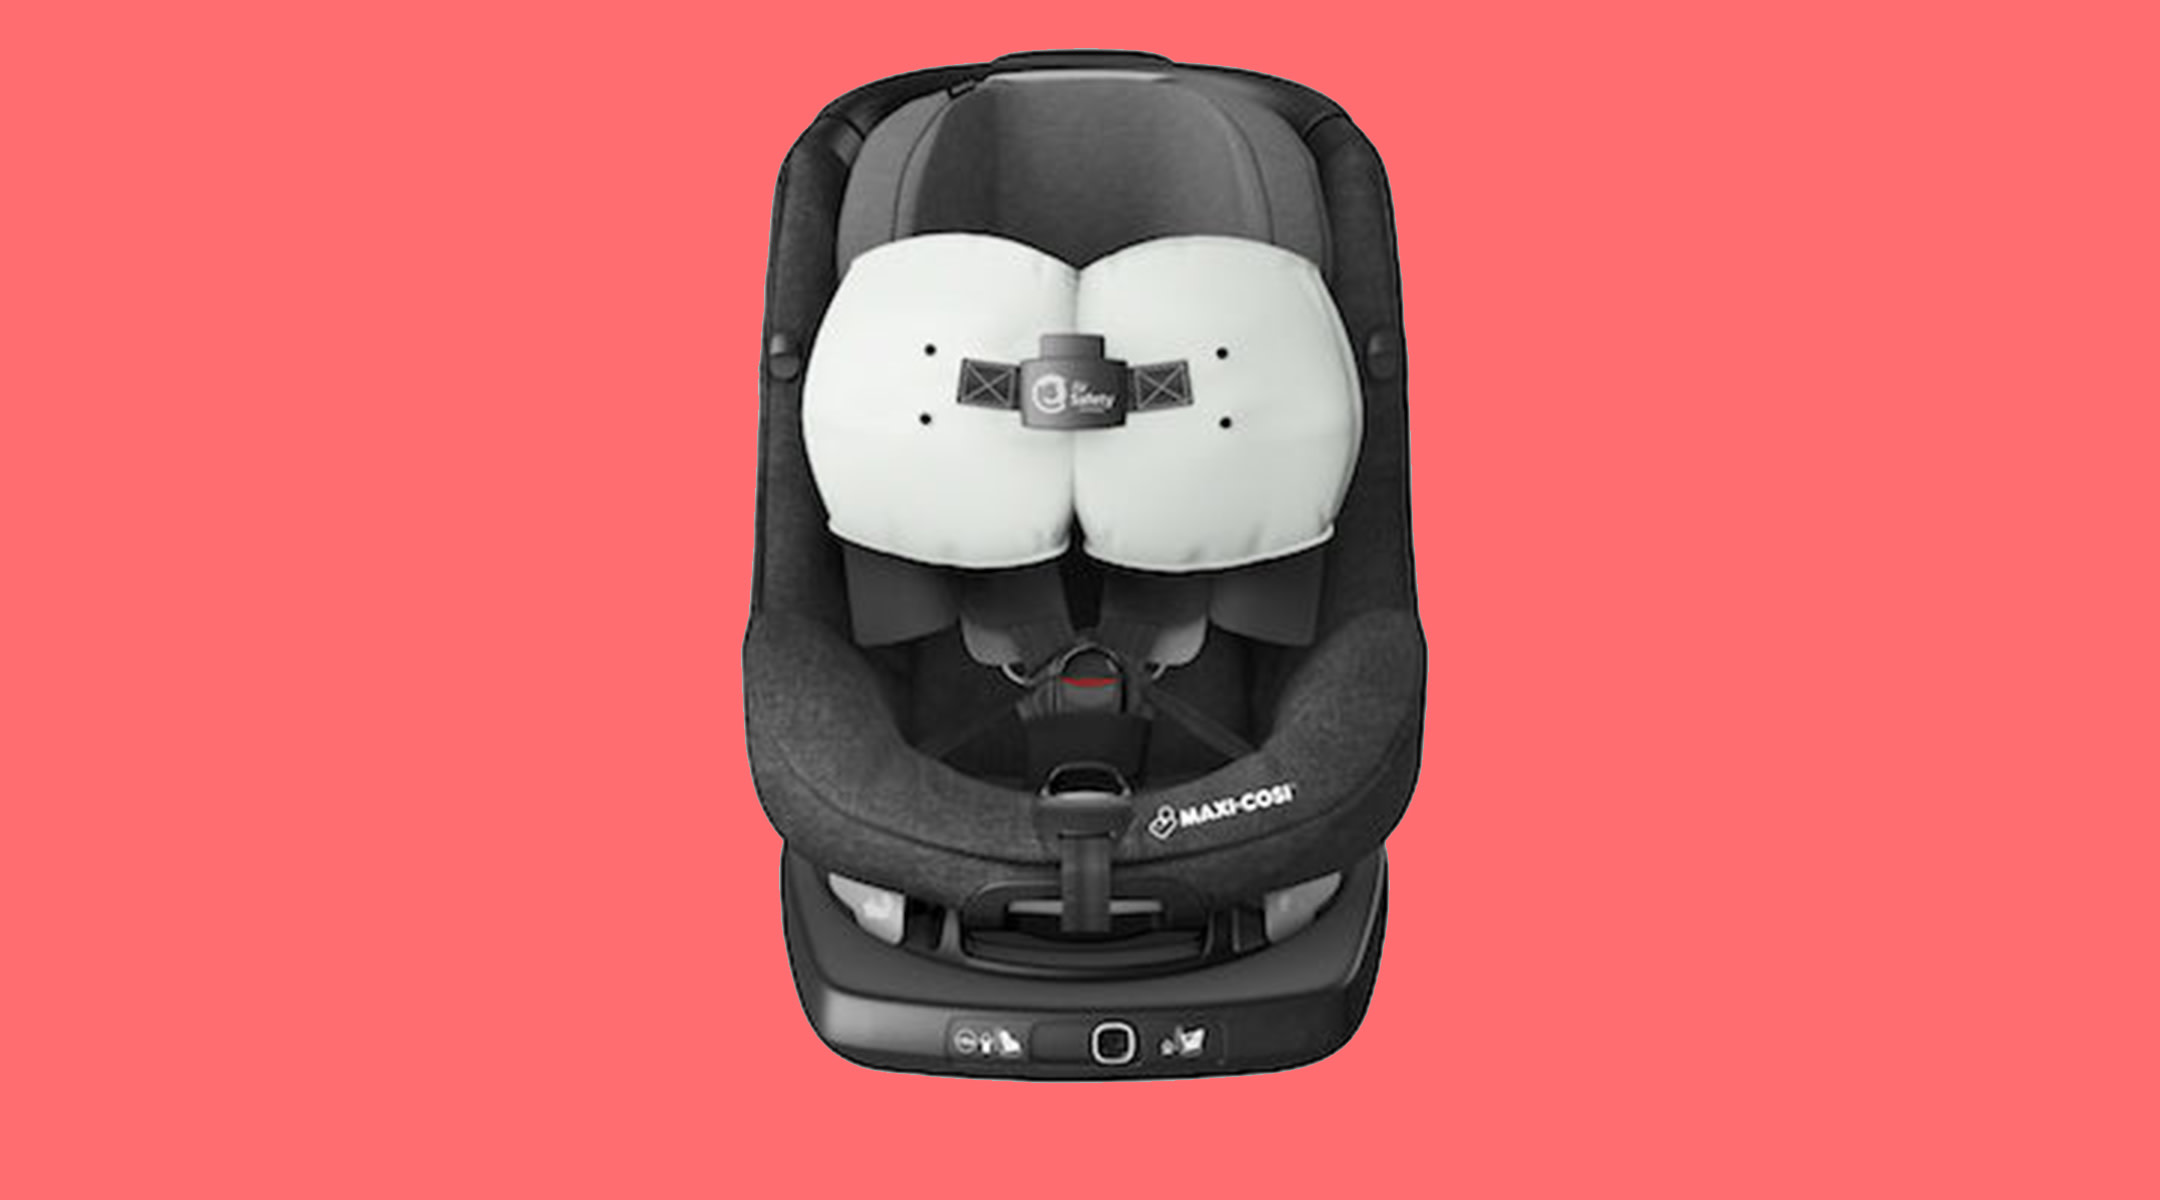 Hou op Maan kousen Maxi-Cosi Makes First Car Seat With Built-In Airbags